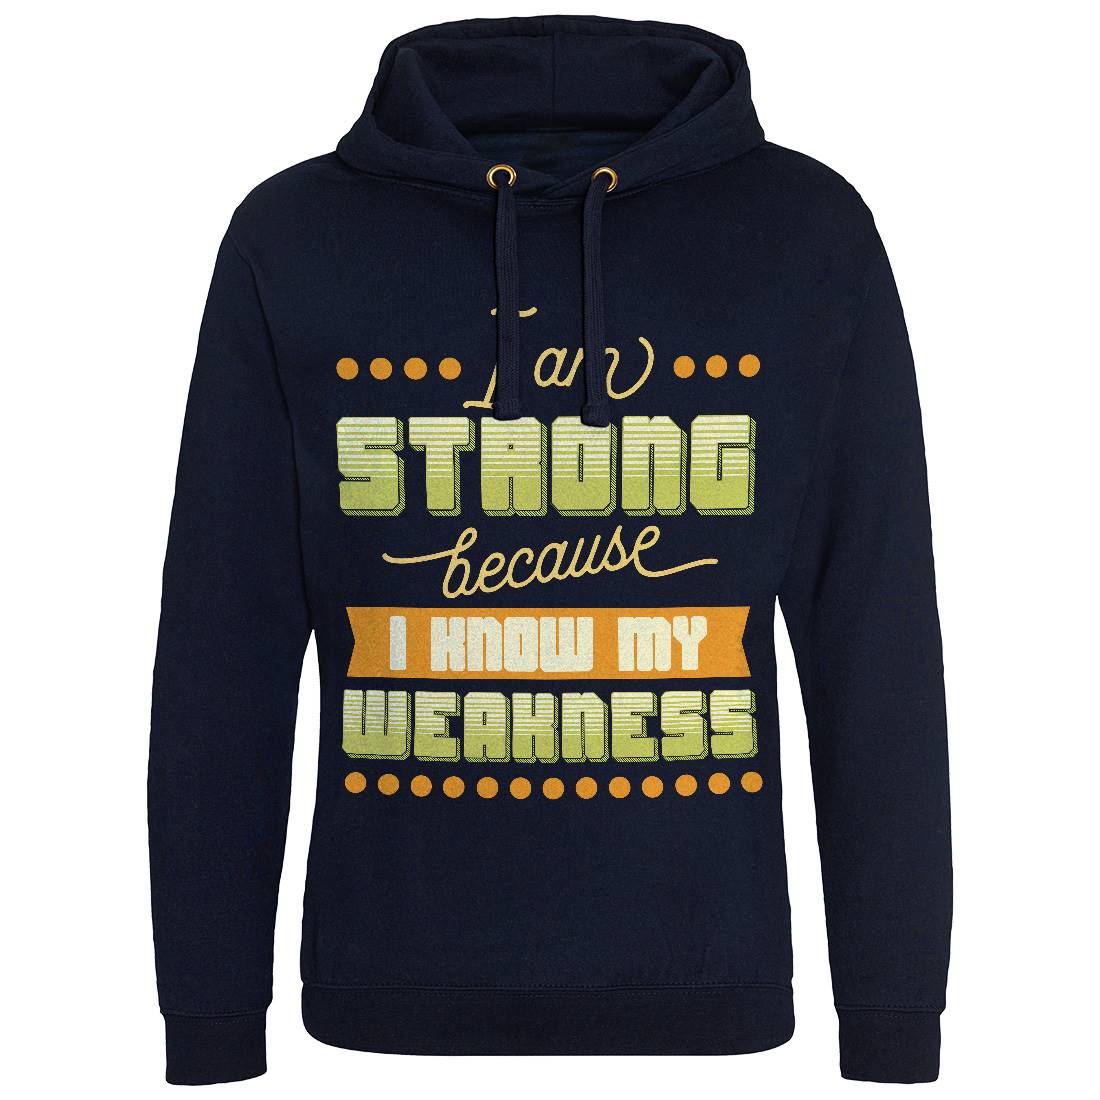 Strong Mens Hoodie Without Pocket Gym B344